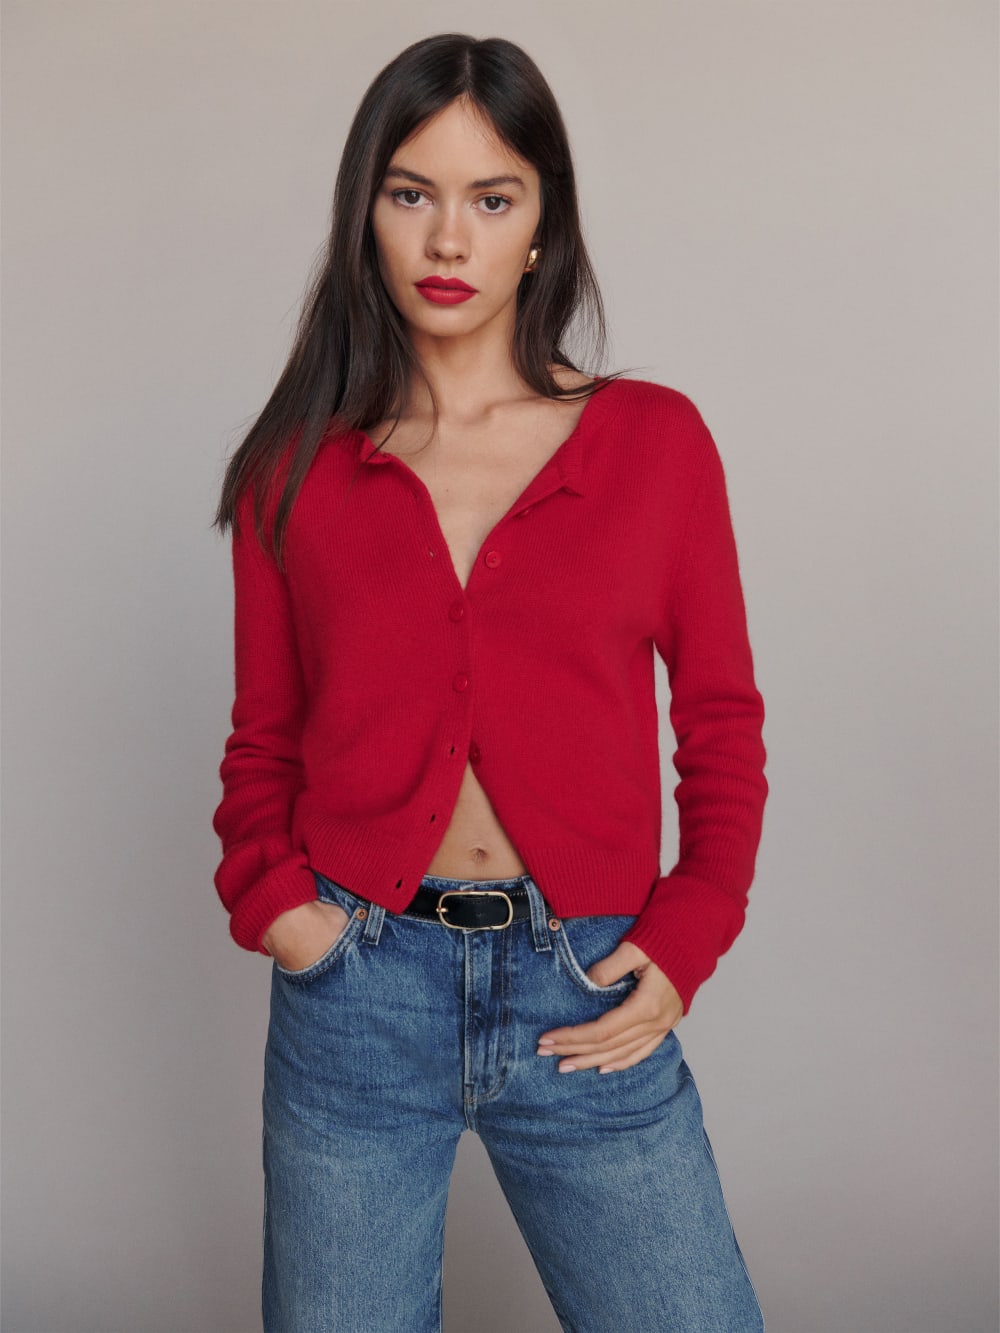 Reformation Clara Cashmere crew cardigan in red. Button front and ribbed hem